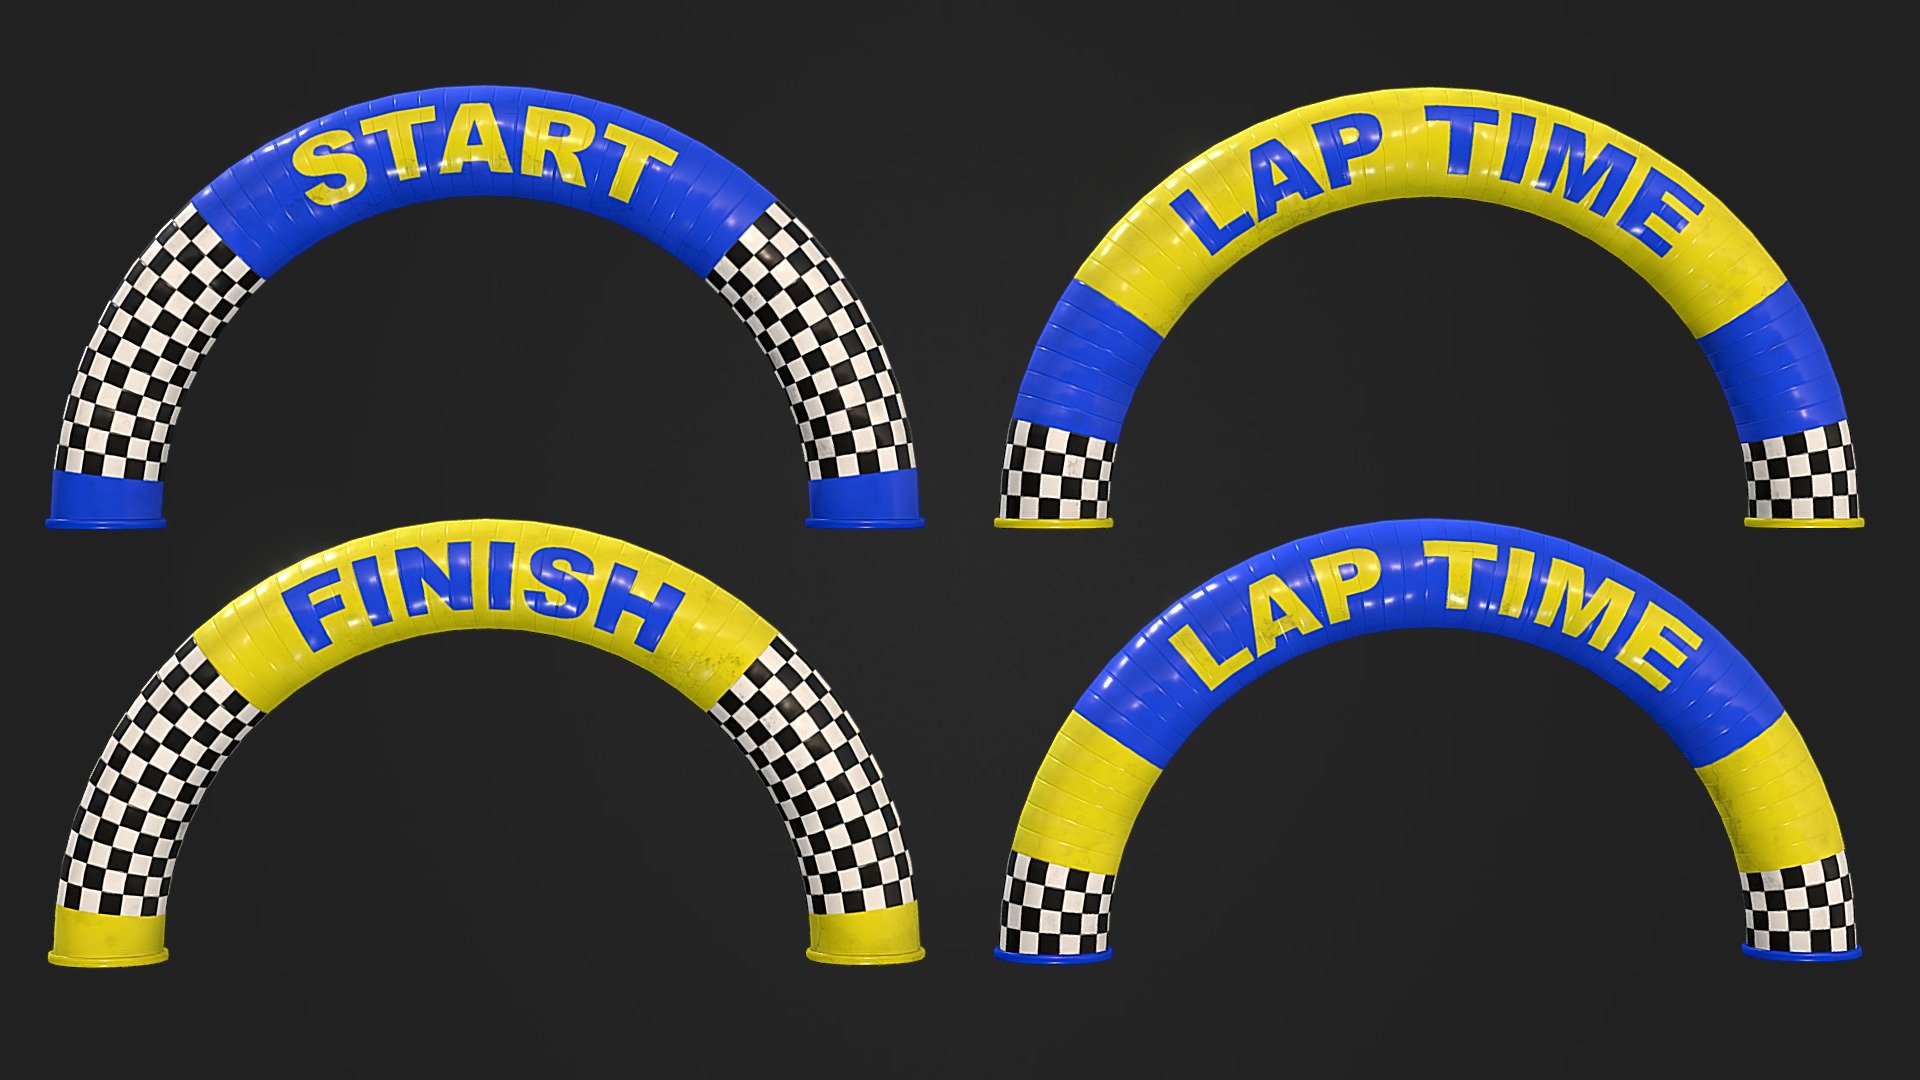 Realtime optimized, low poly race arch pack 1 - starter kit. Included is an infantable half circle race arch made in real world scale meters: width 16,23 m, height 8,165 m, depth 2,192 m. Asset´s quality is at least fully sufficiant for third person cameras. Triangle count for each low poly arch is 1584 tris. Arch is non-overlapping unwrapped and each variant shares the same PBR textures and all 4 x arches share just 2 x base maps. Attachmet contains 8 PBR specular workflow ready textures in native 2048 x 2048 px including normal DX and normal GL maps and AO with and without floor occlusion. Included files are .max (native 2022), .fbx, .obj, .dae, .3ds. View the complete Low Poly Race Arch collection here: https://skfb.ly/oRLYL - Low Poly Race Arch Pack 1 - Starter Kit - Buy Royalty Free 3D model by cgamp 3d model